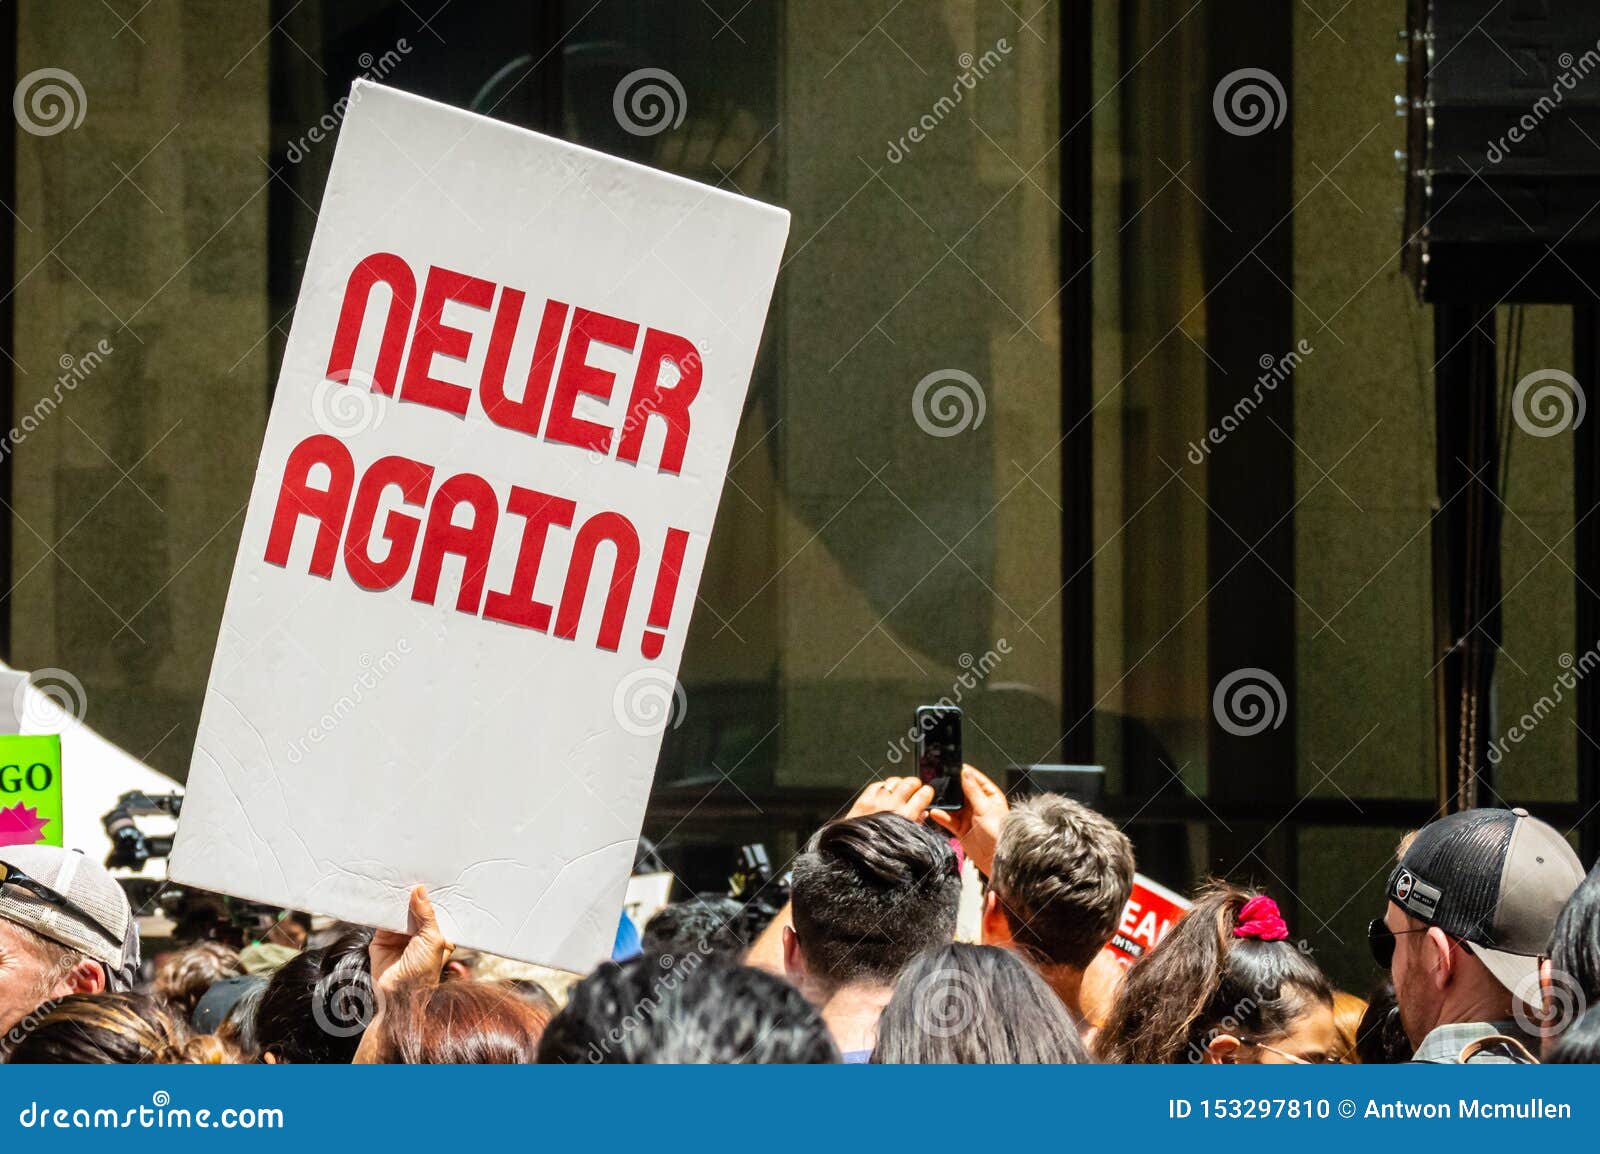 protest-against-immigration-ice-and-border-patrol-a-sign-reads-never